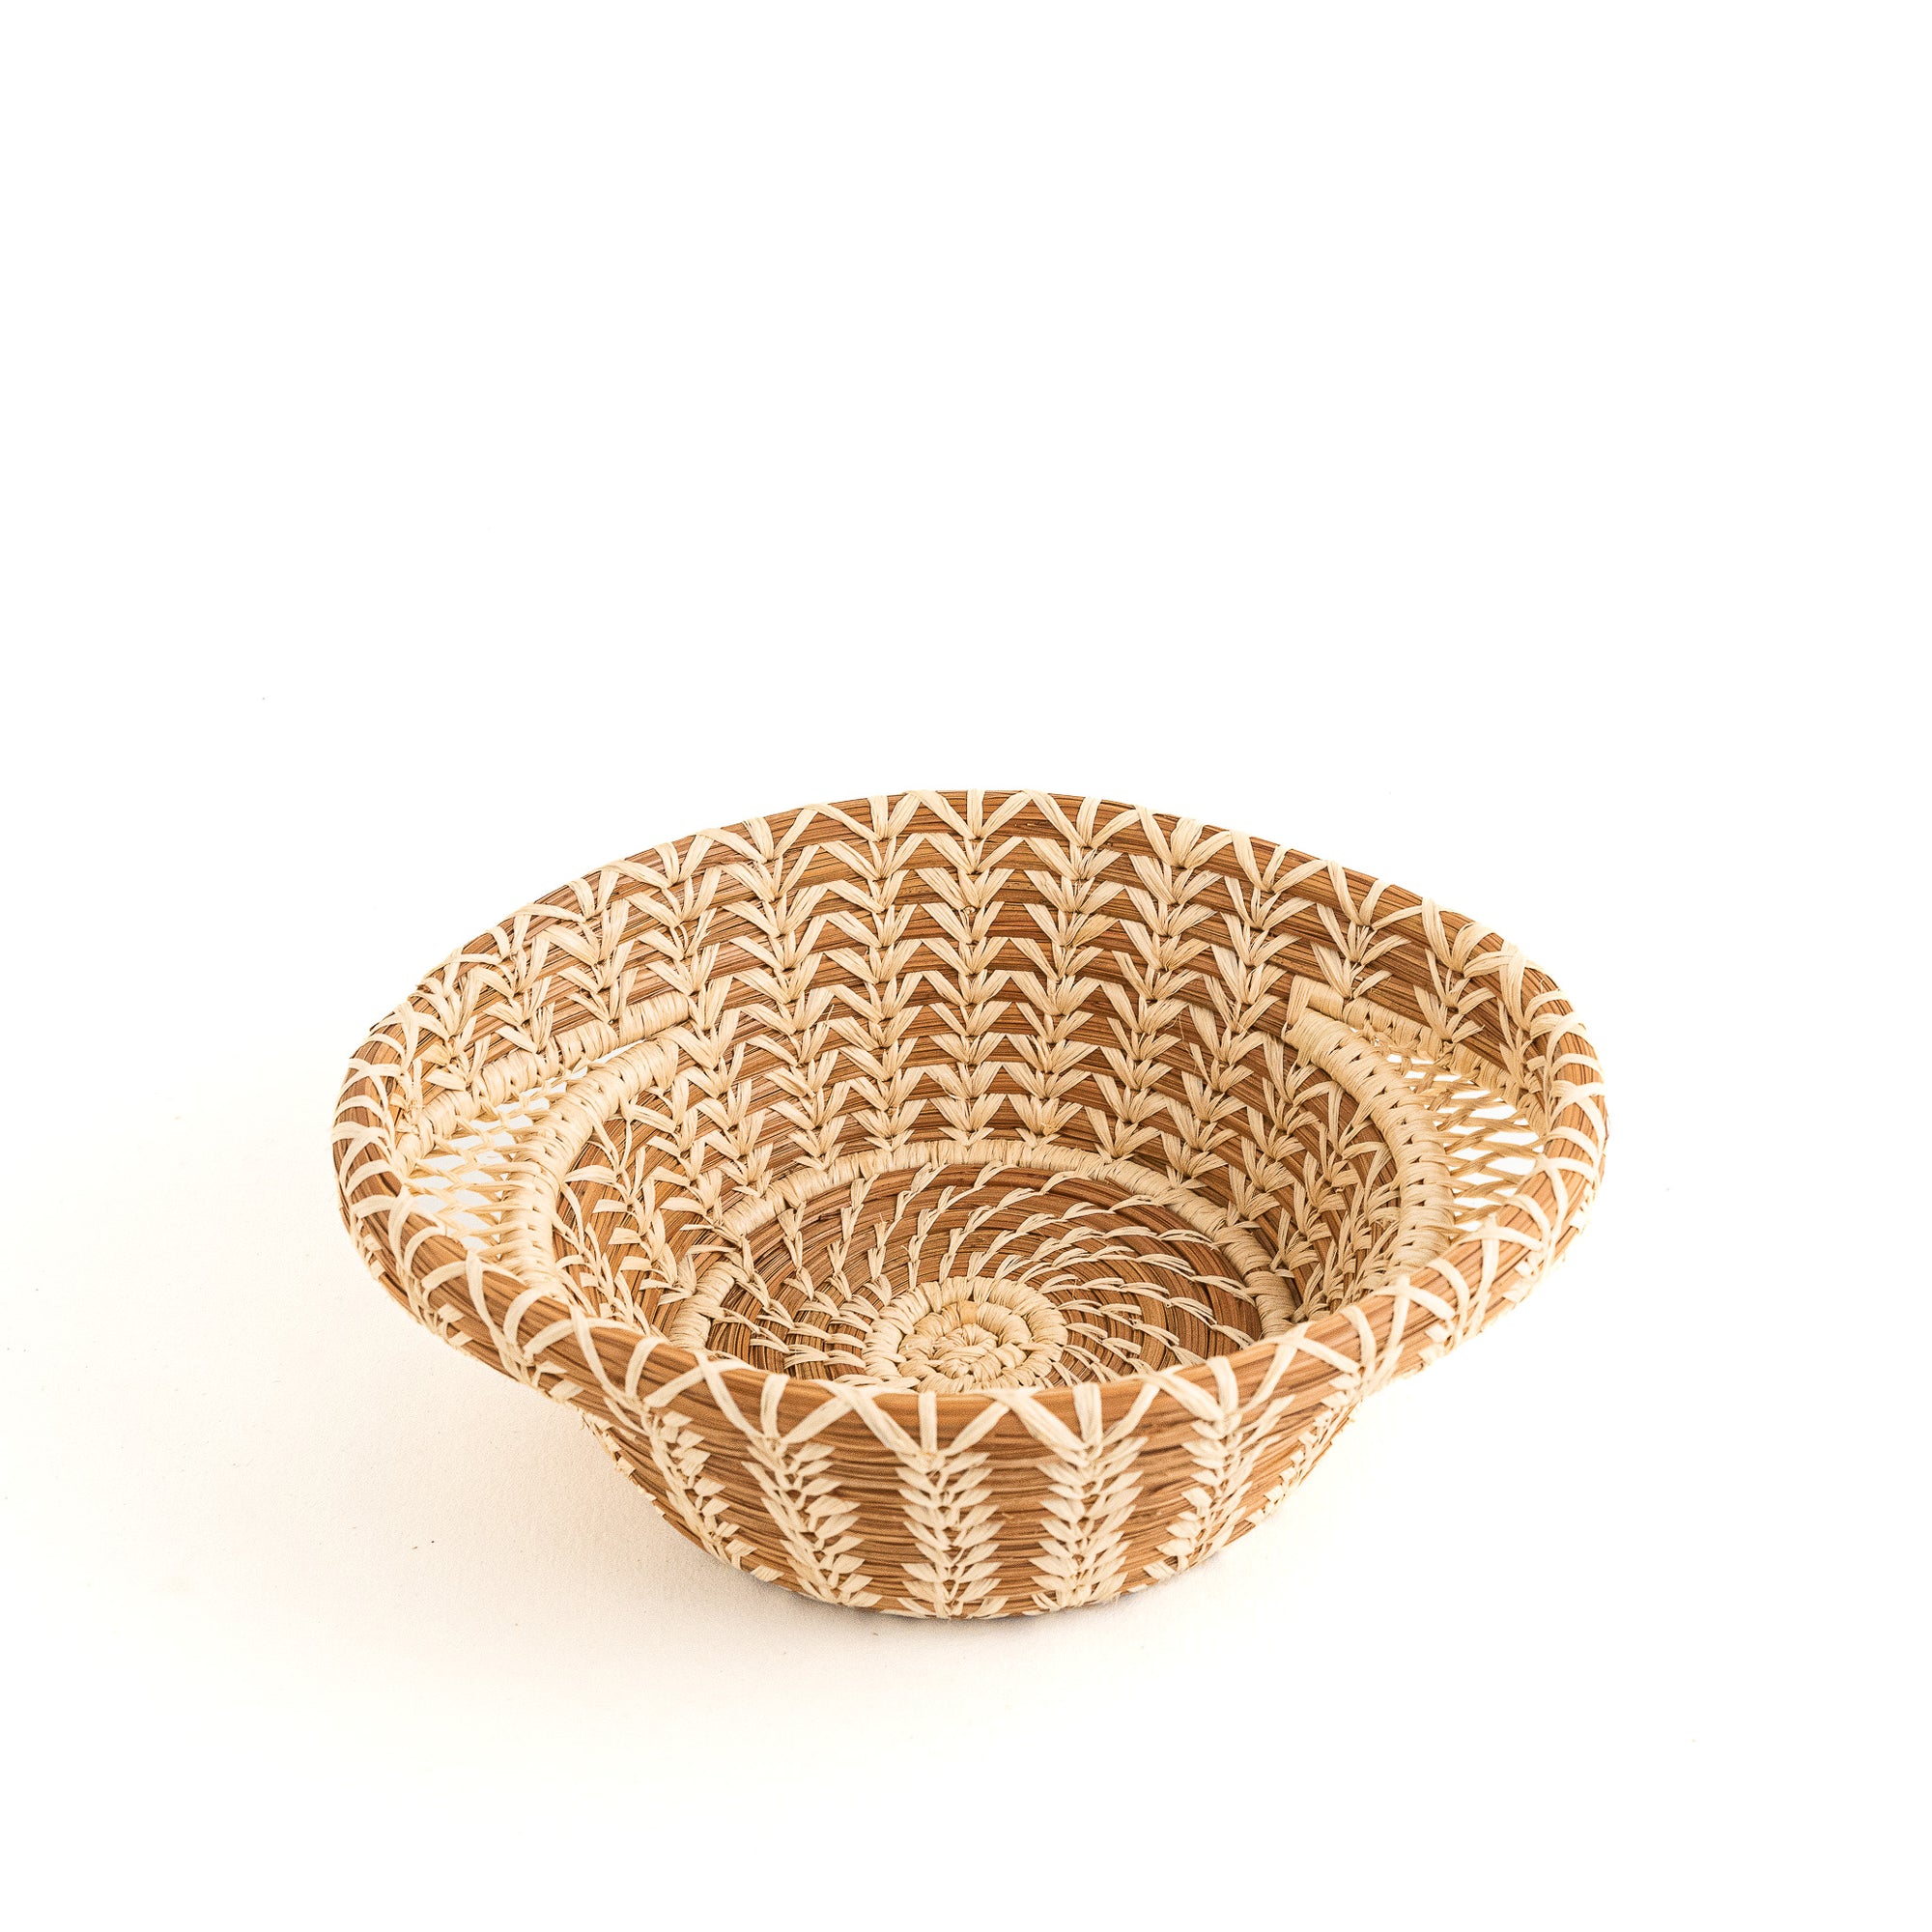 Small Pine Needle Basket with Lacy Handles